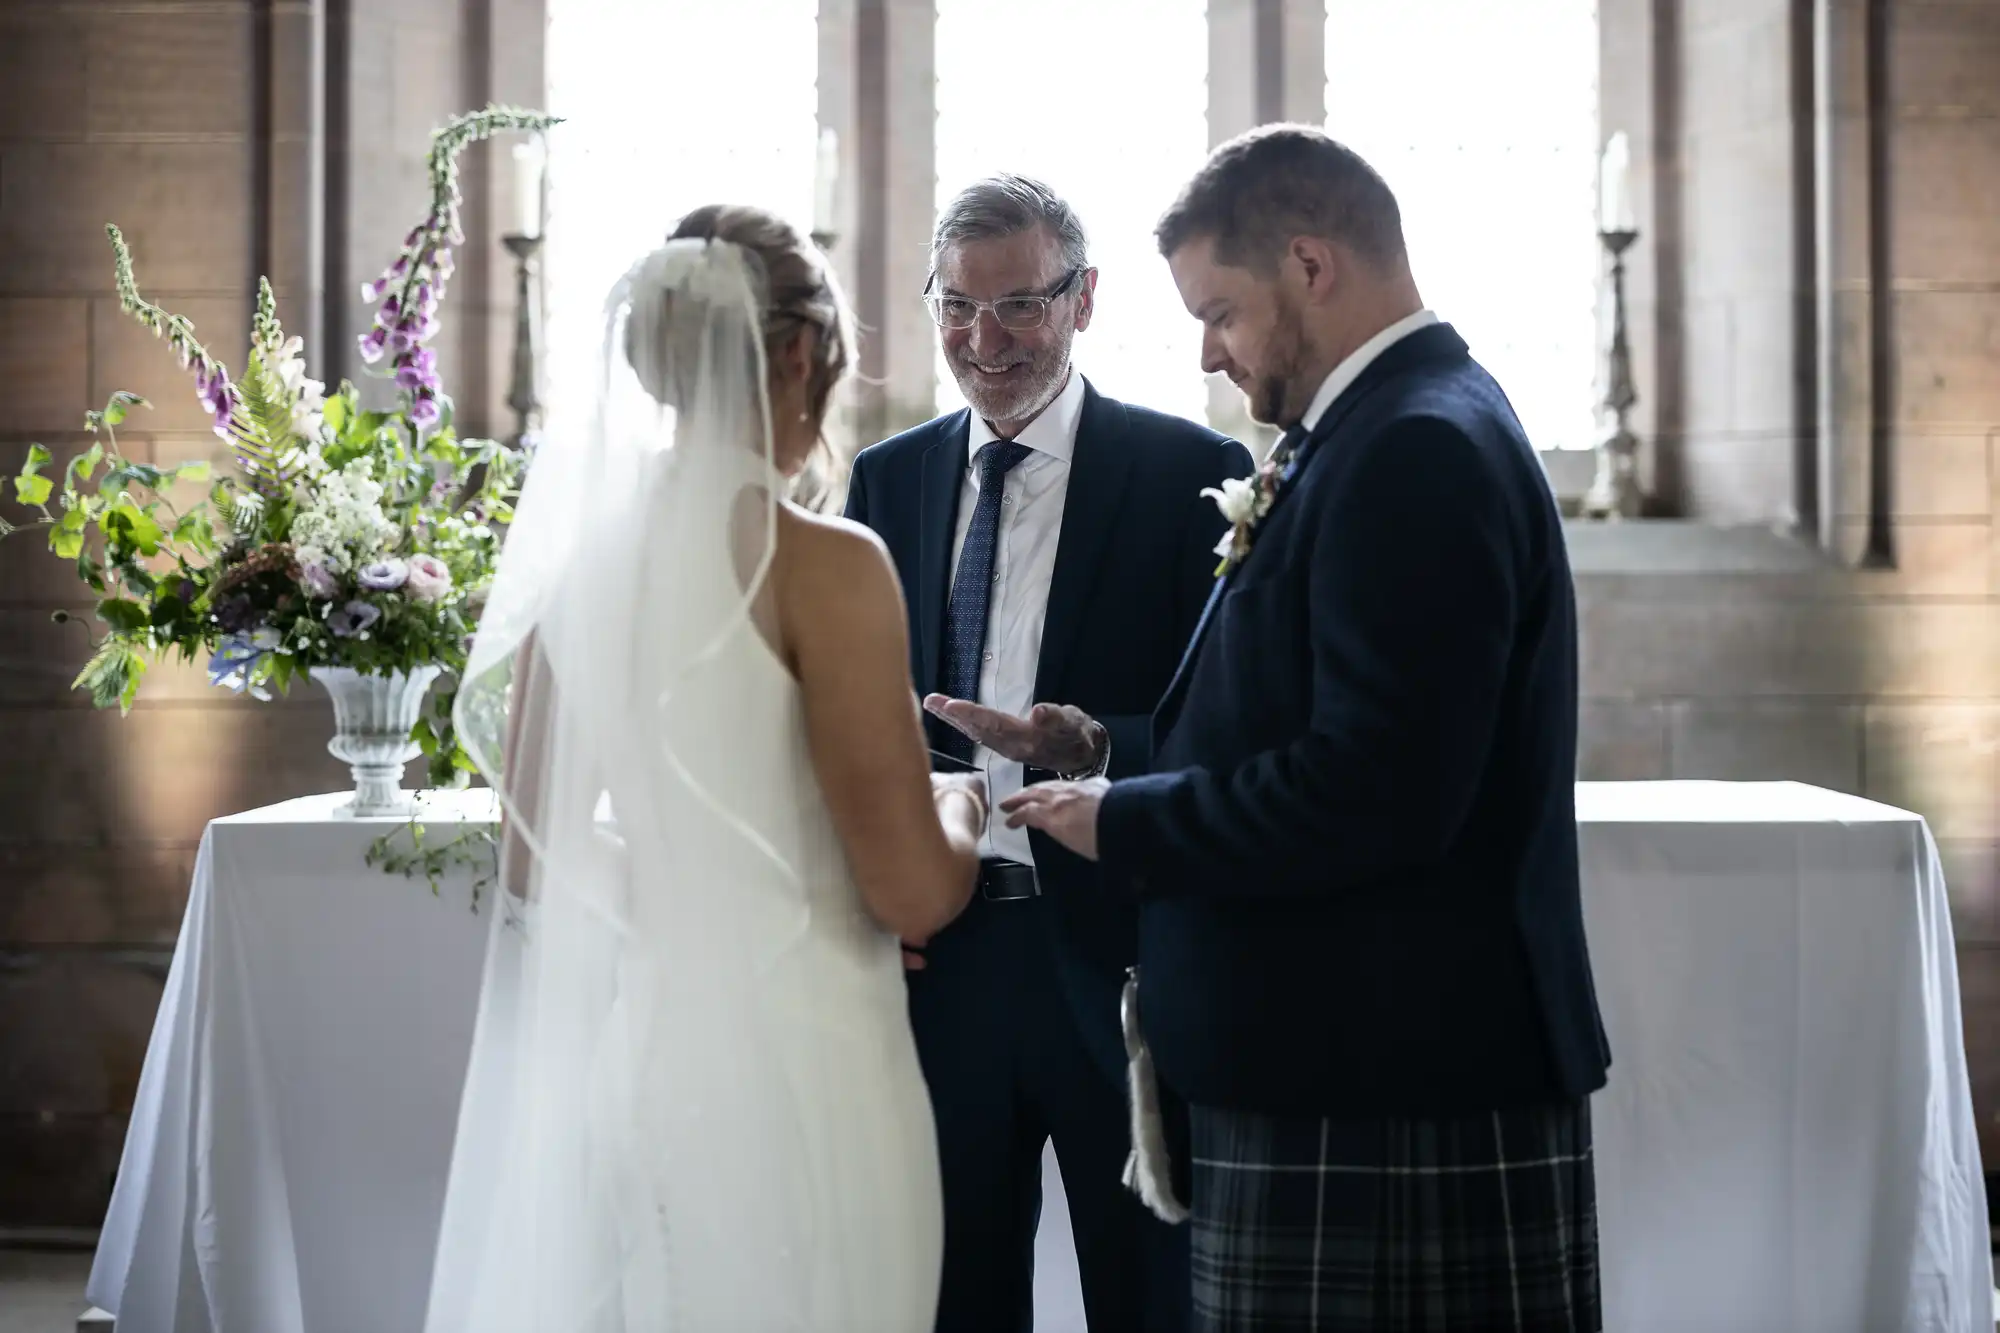 A bride and groom exchange vows at a wedding ceremony, overseen by an officiant in a suit, in a softly lit hall with floral decorations.